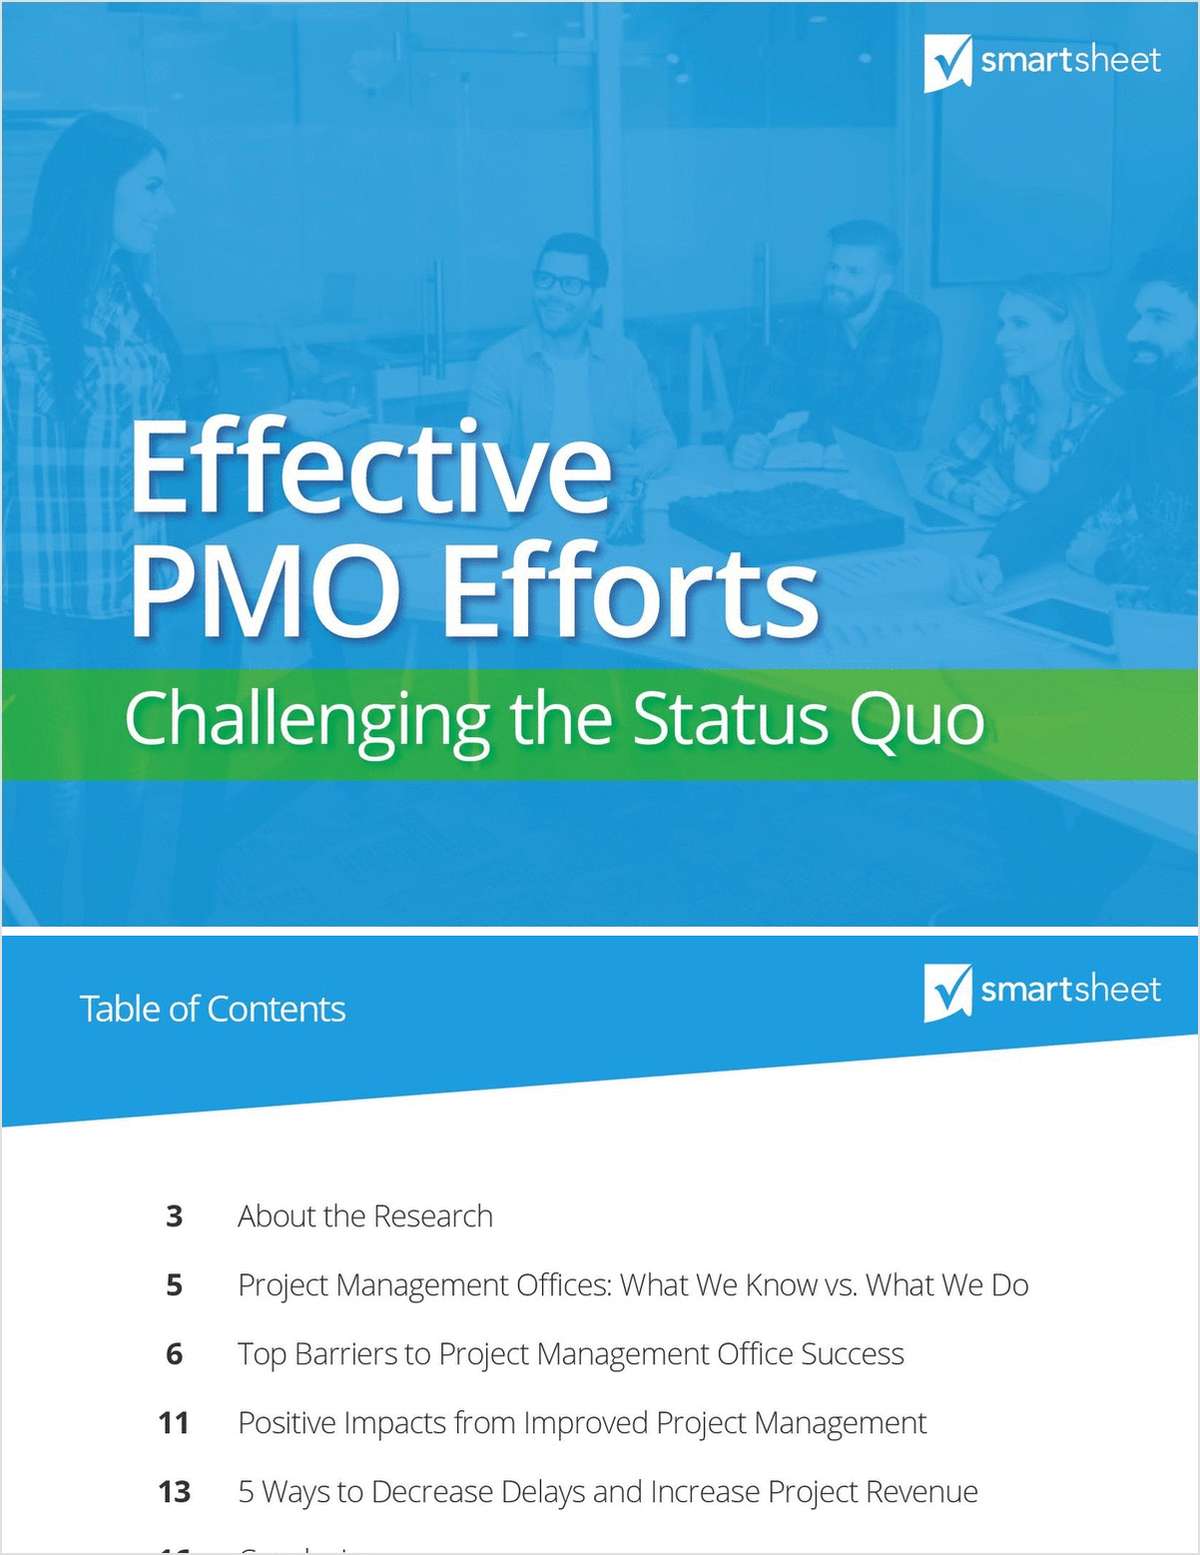 Effective PMO Efforts: Challenging the Status Quo